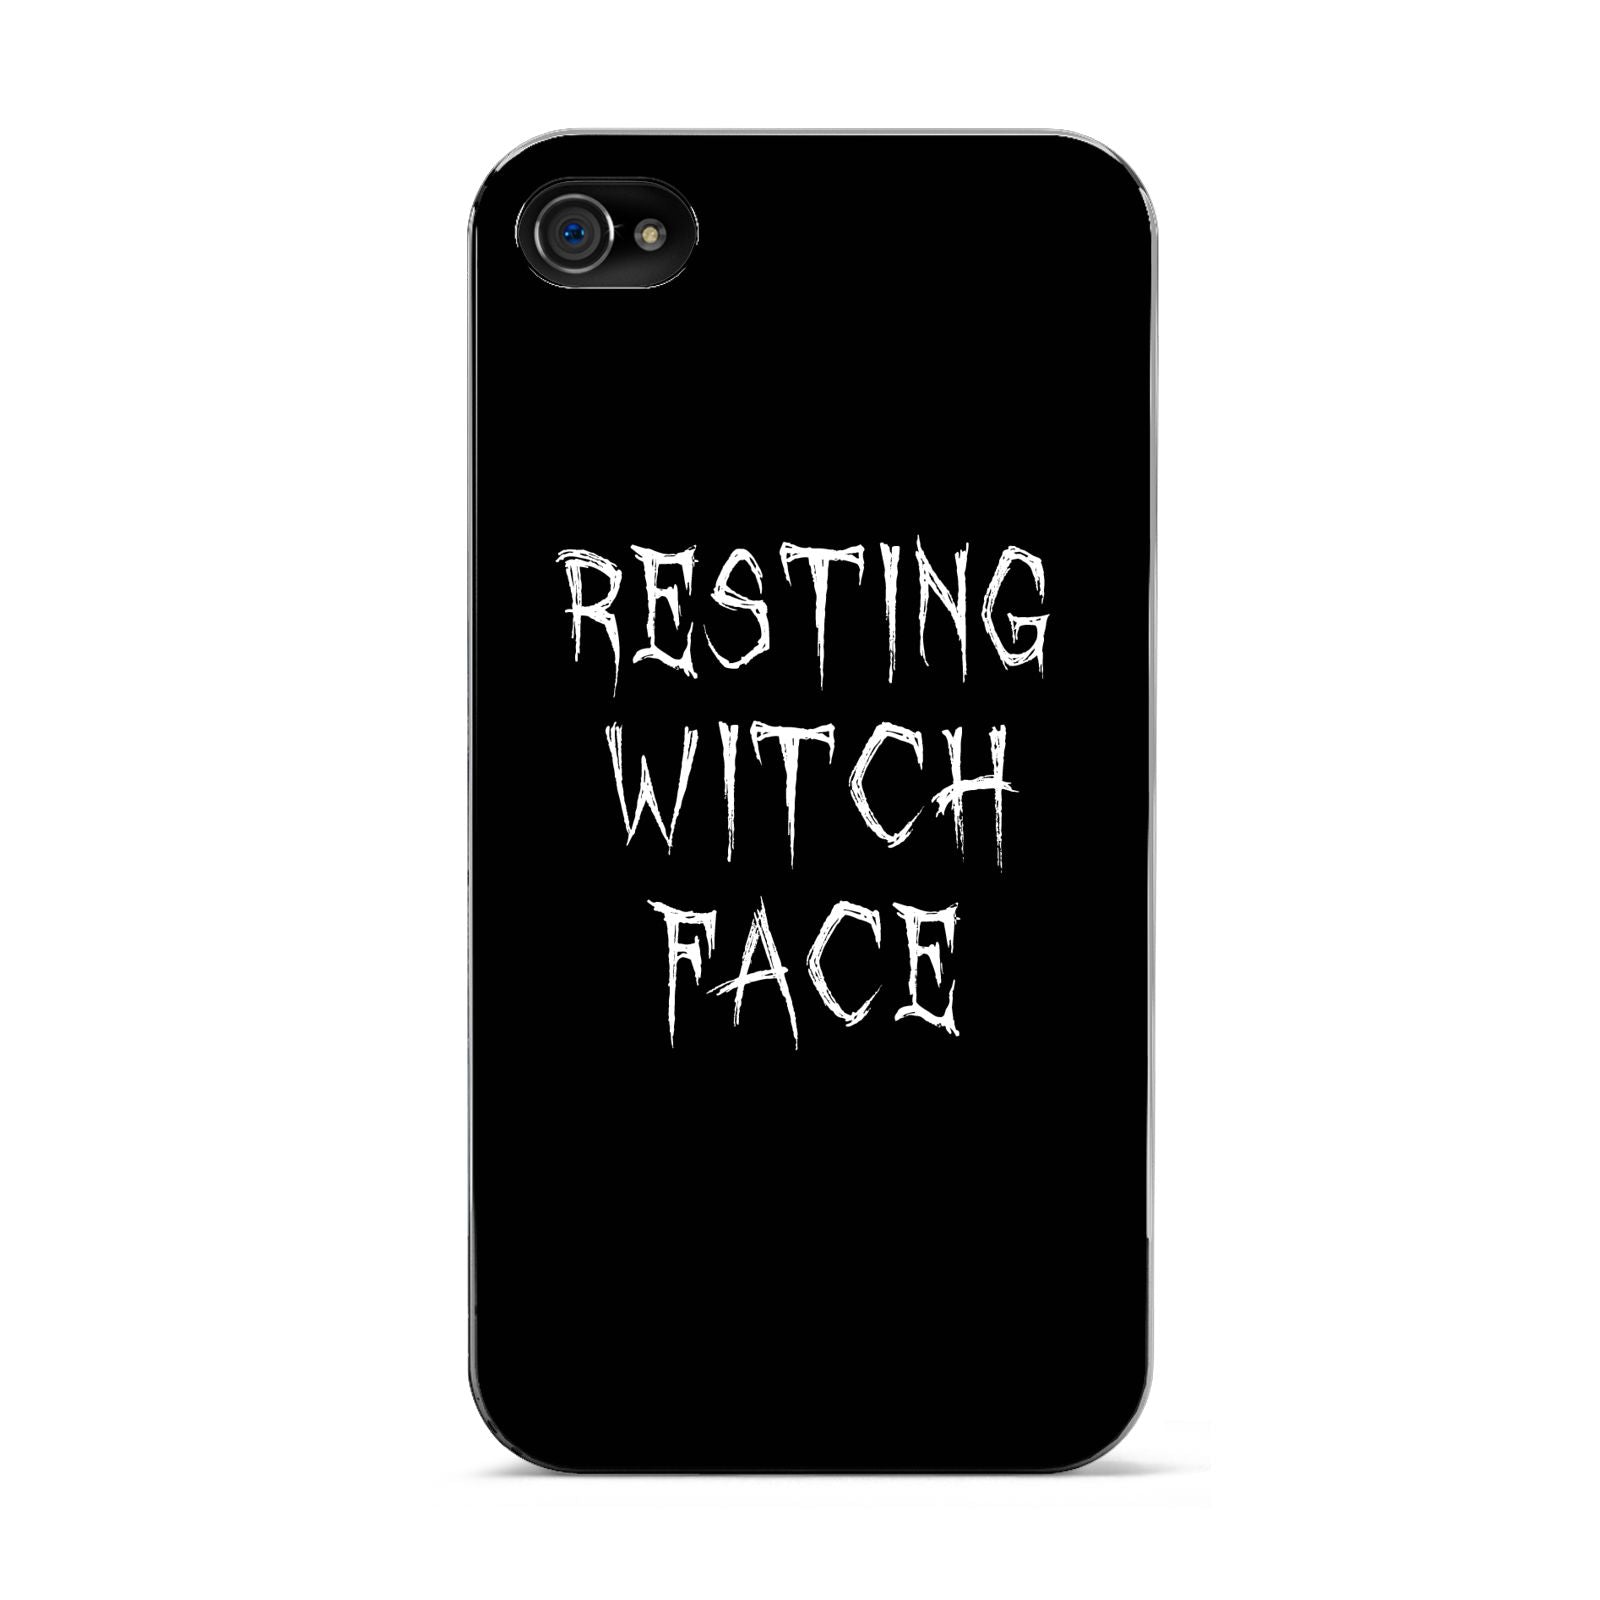 Resting Witch Face Apple iPhone 4s Case